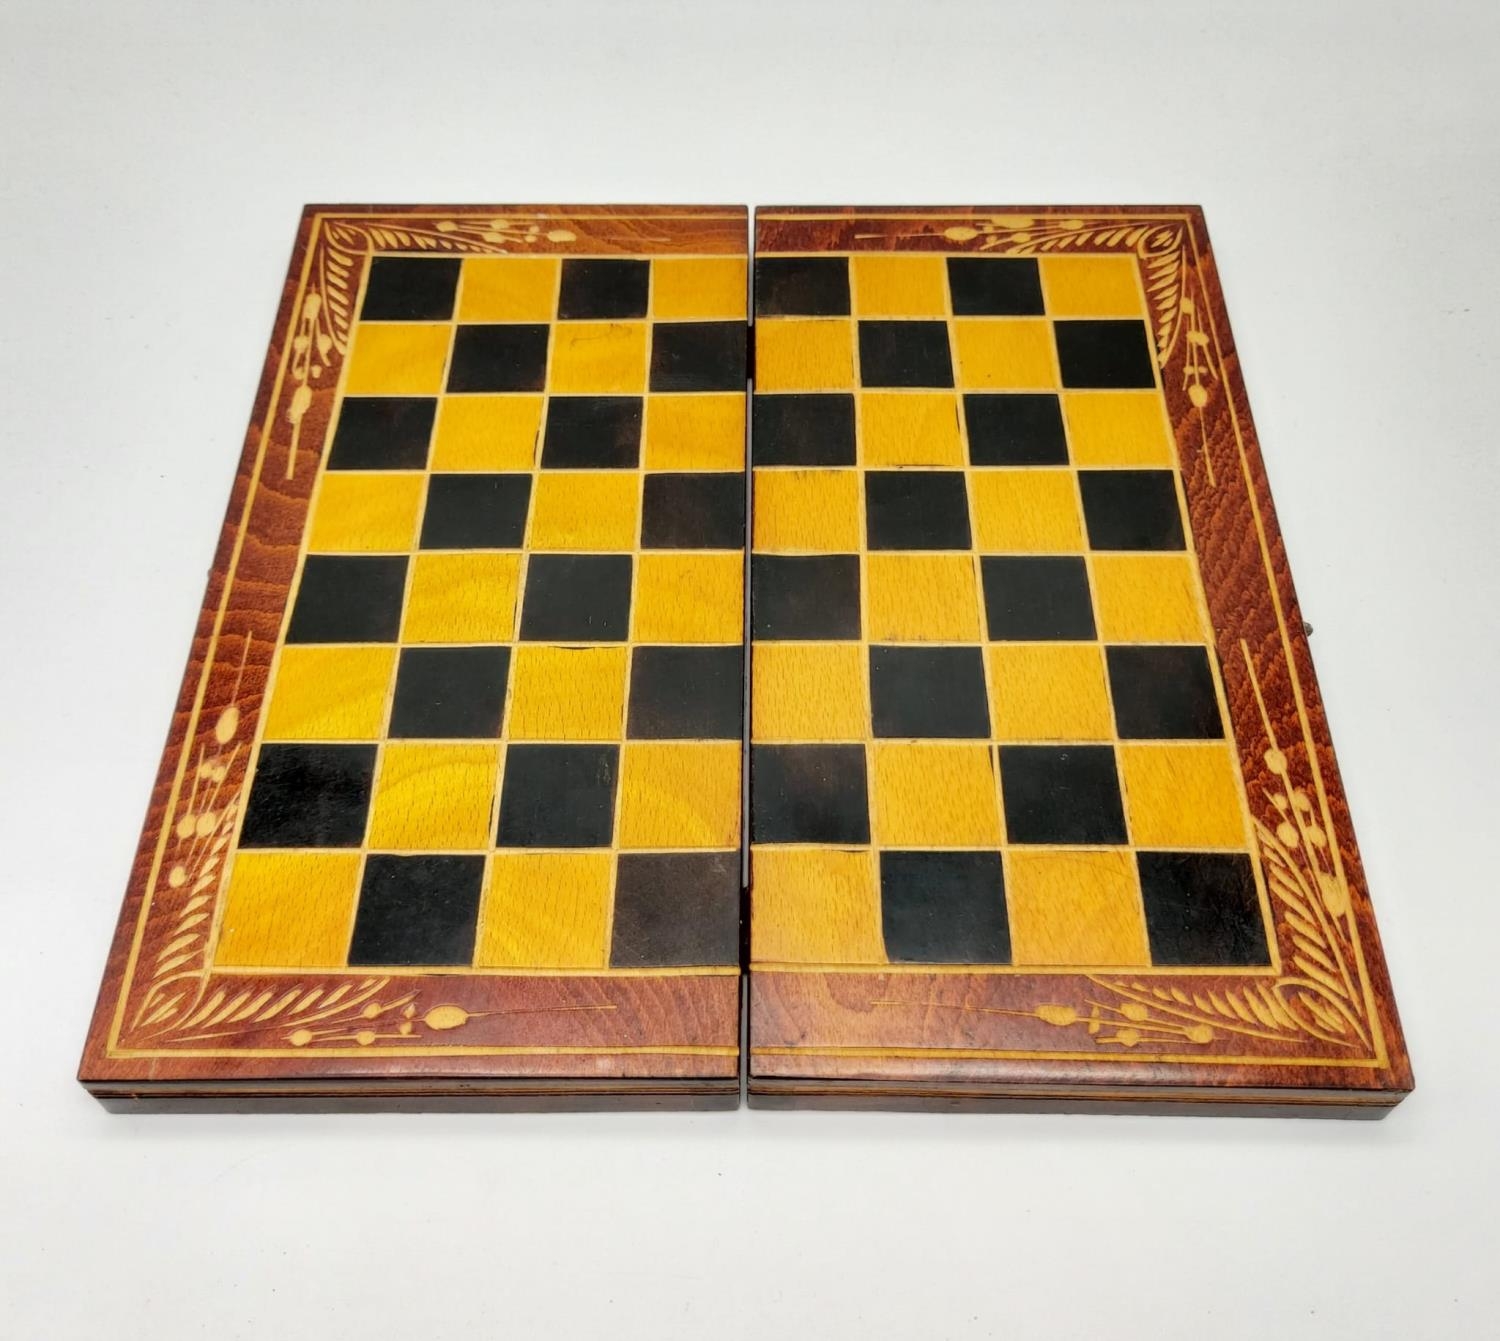 A Vintage Wooden Chess Set with Folding Board. Backgammon board on interior. 26 x 26cm. - Image 5 of 6